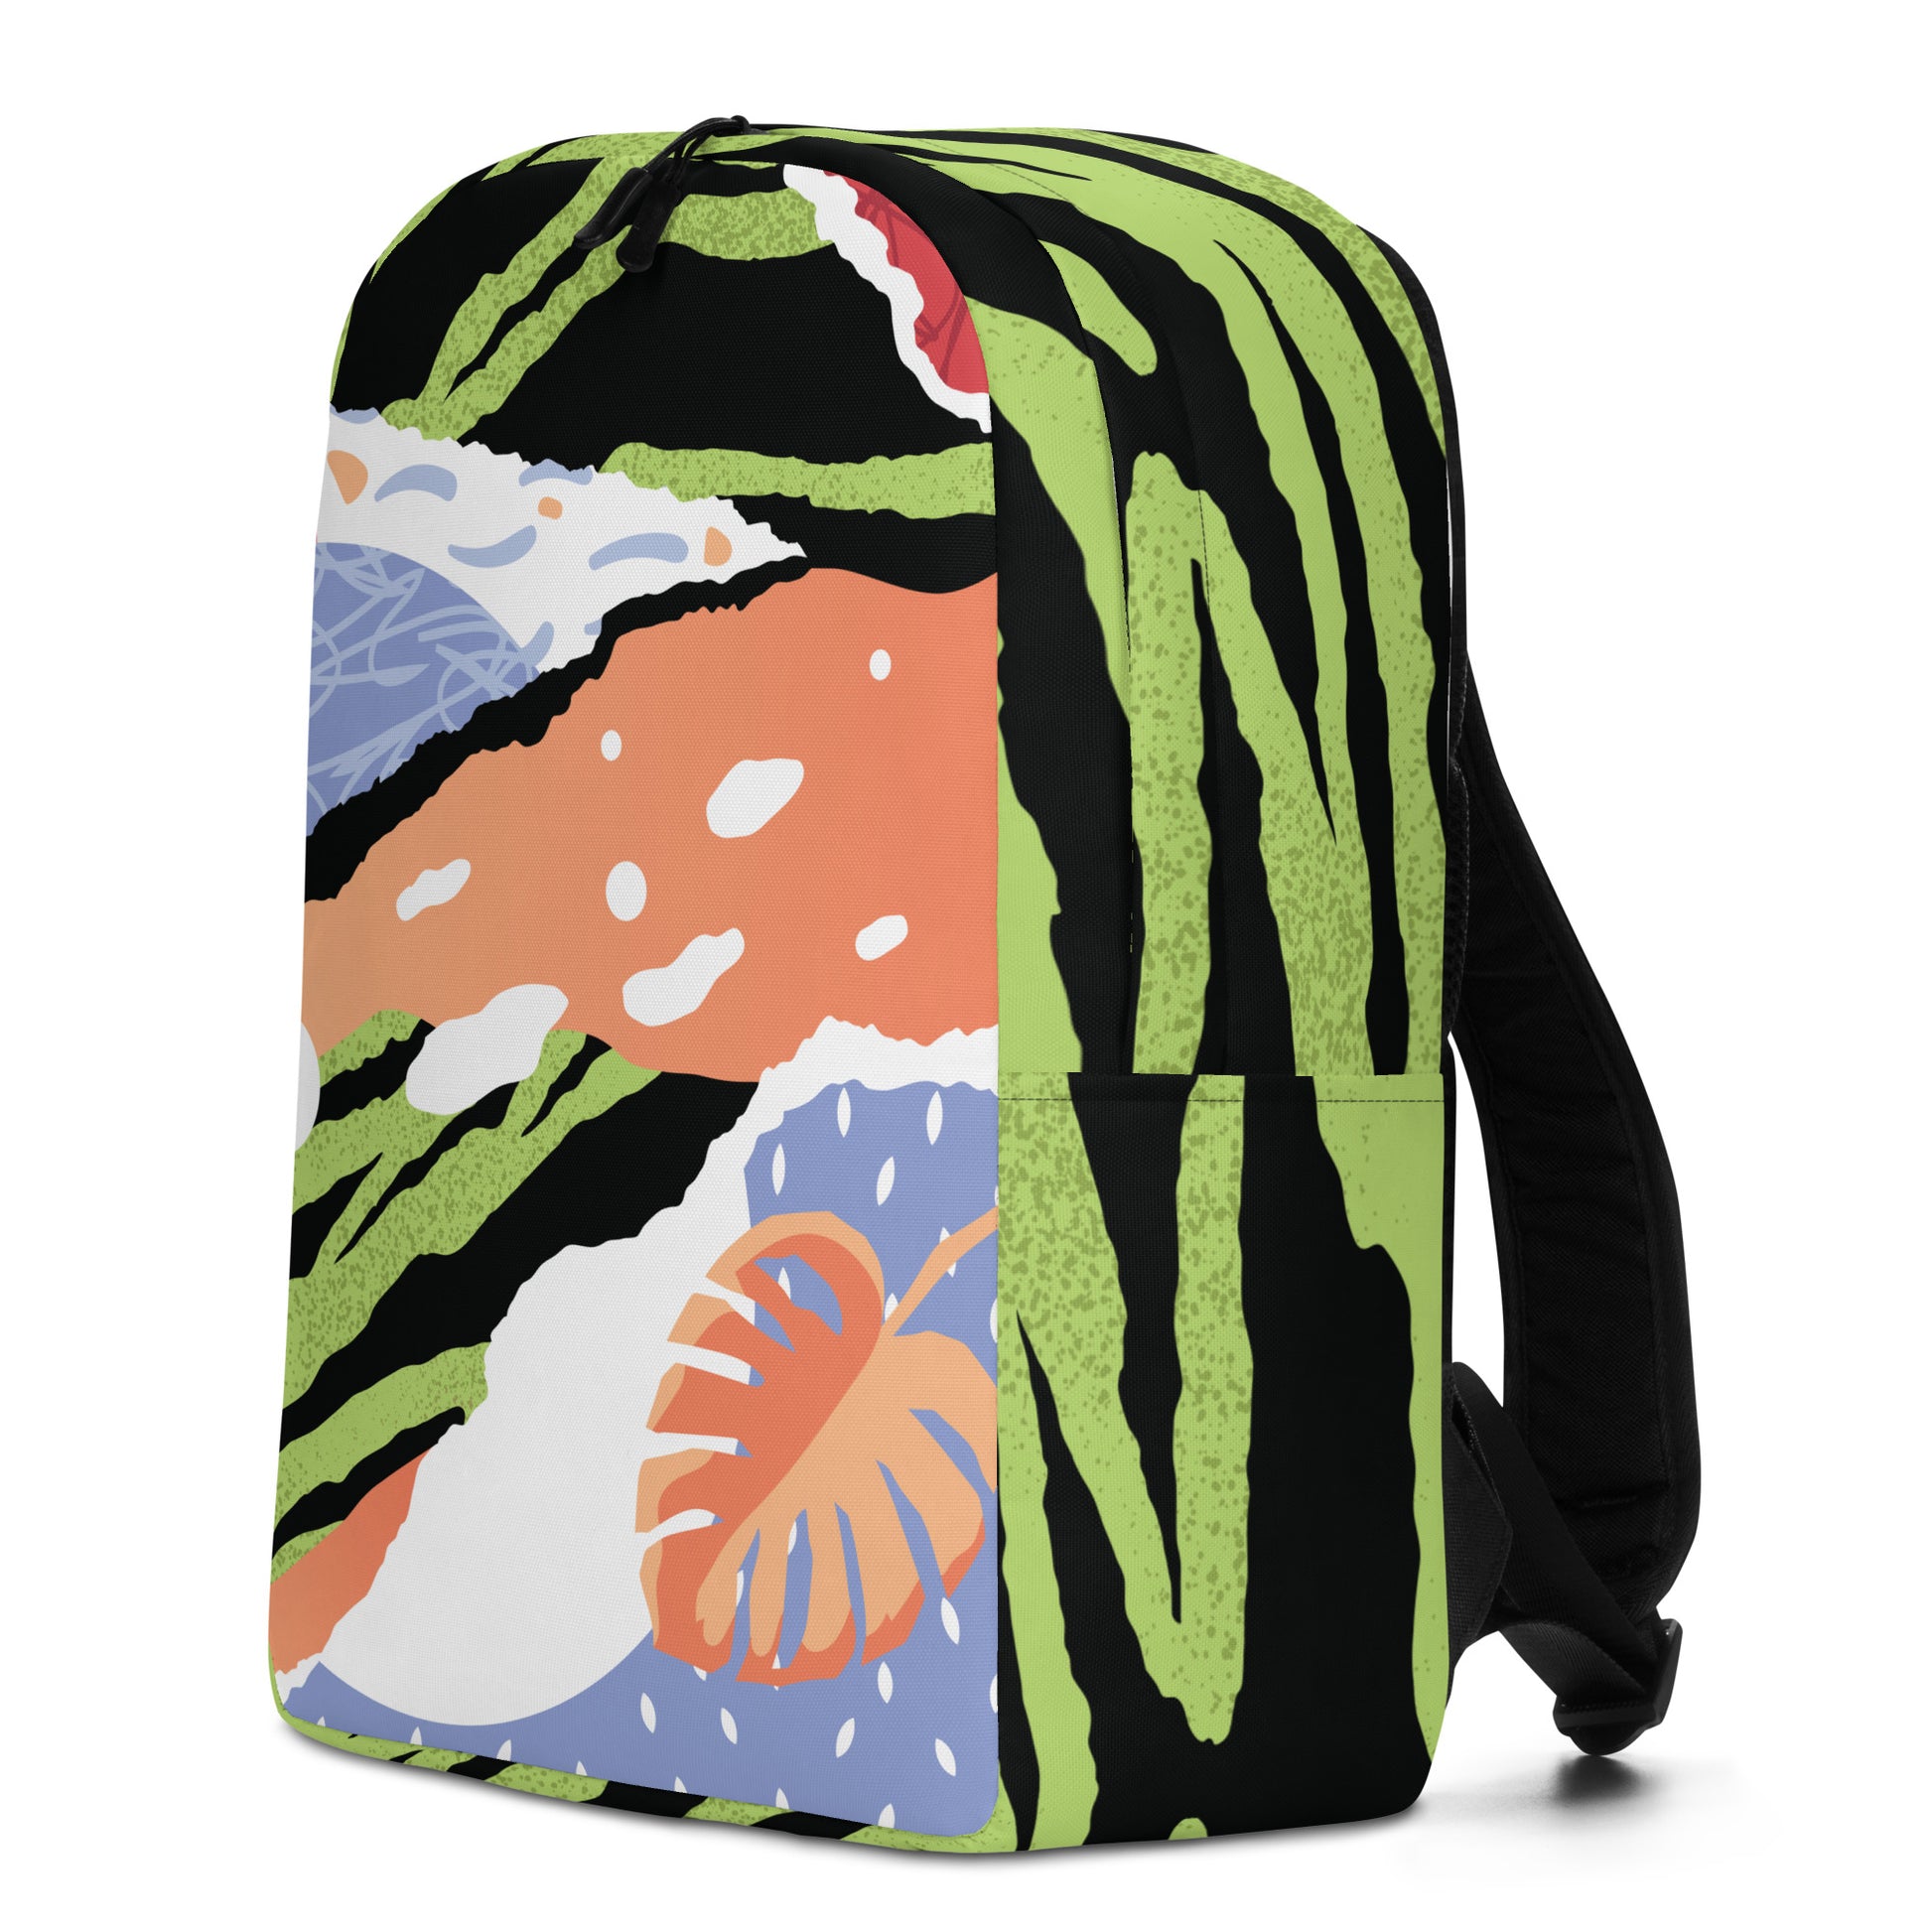 Tropical pop art minimalist backpack seen from the right side